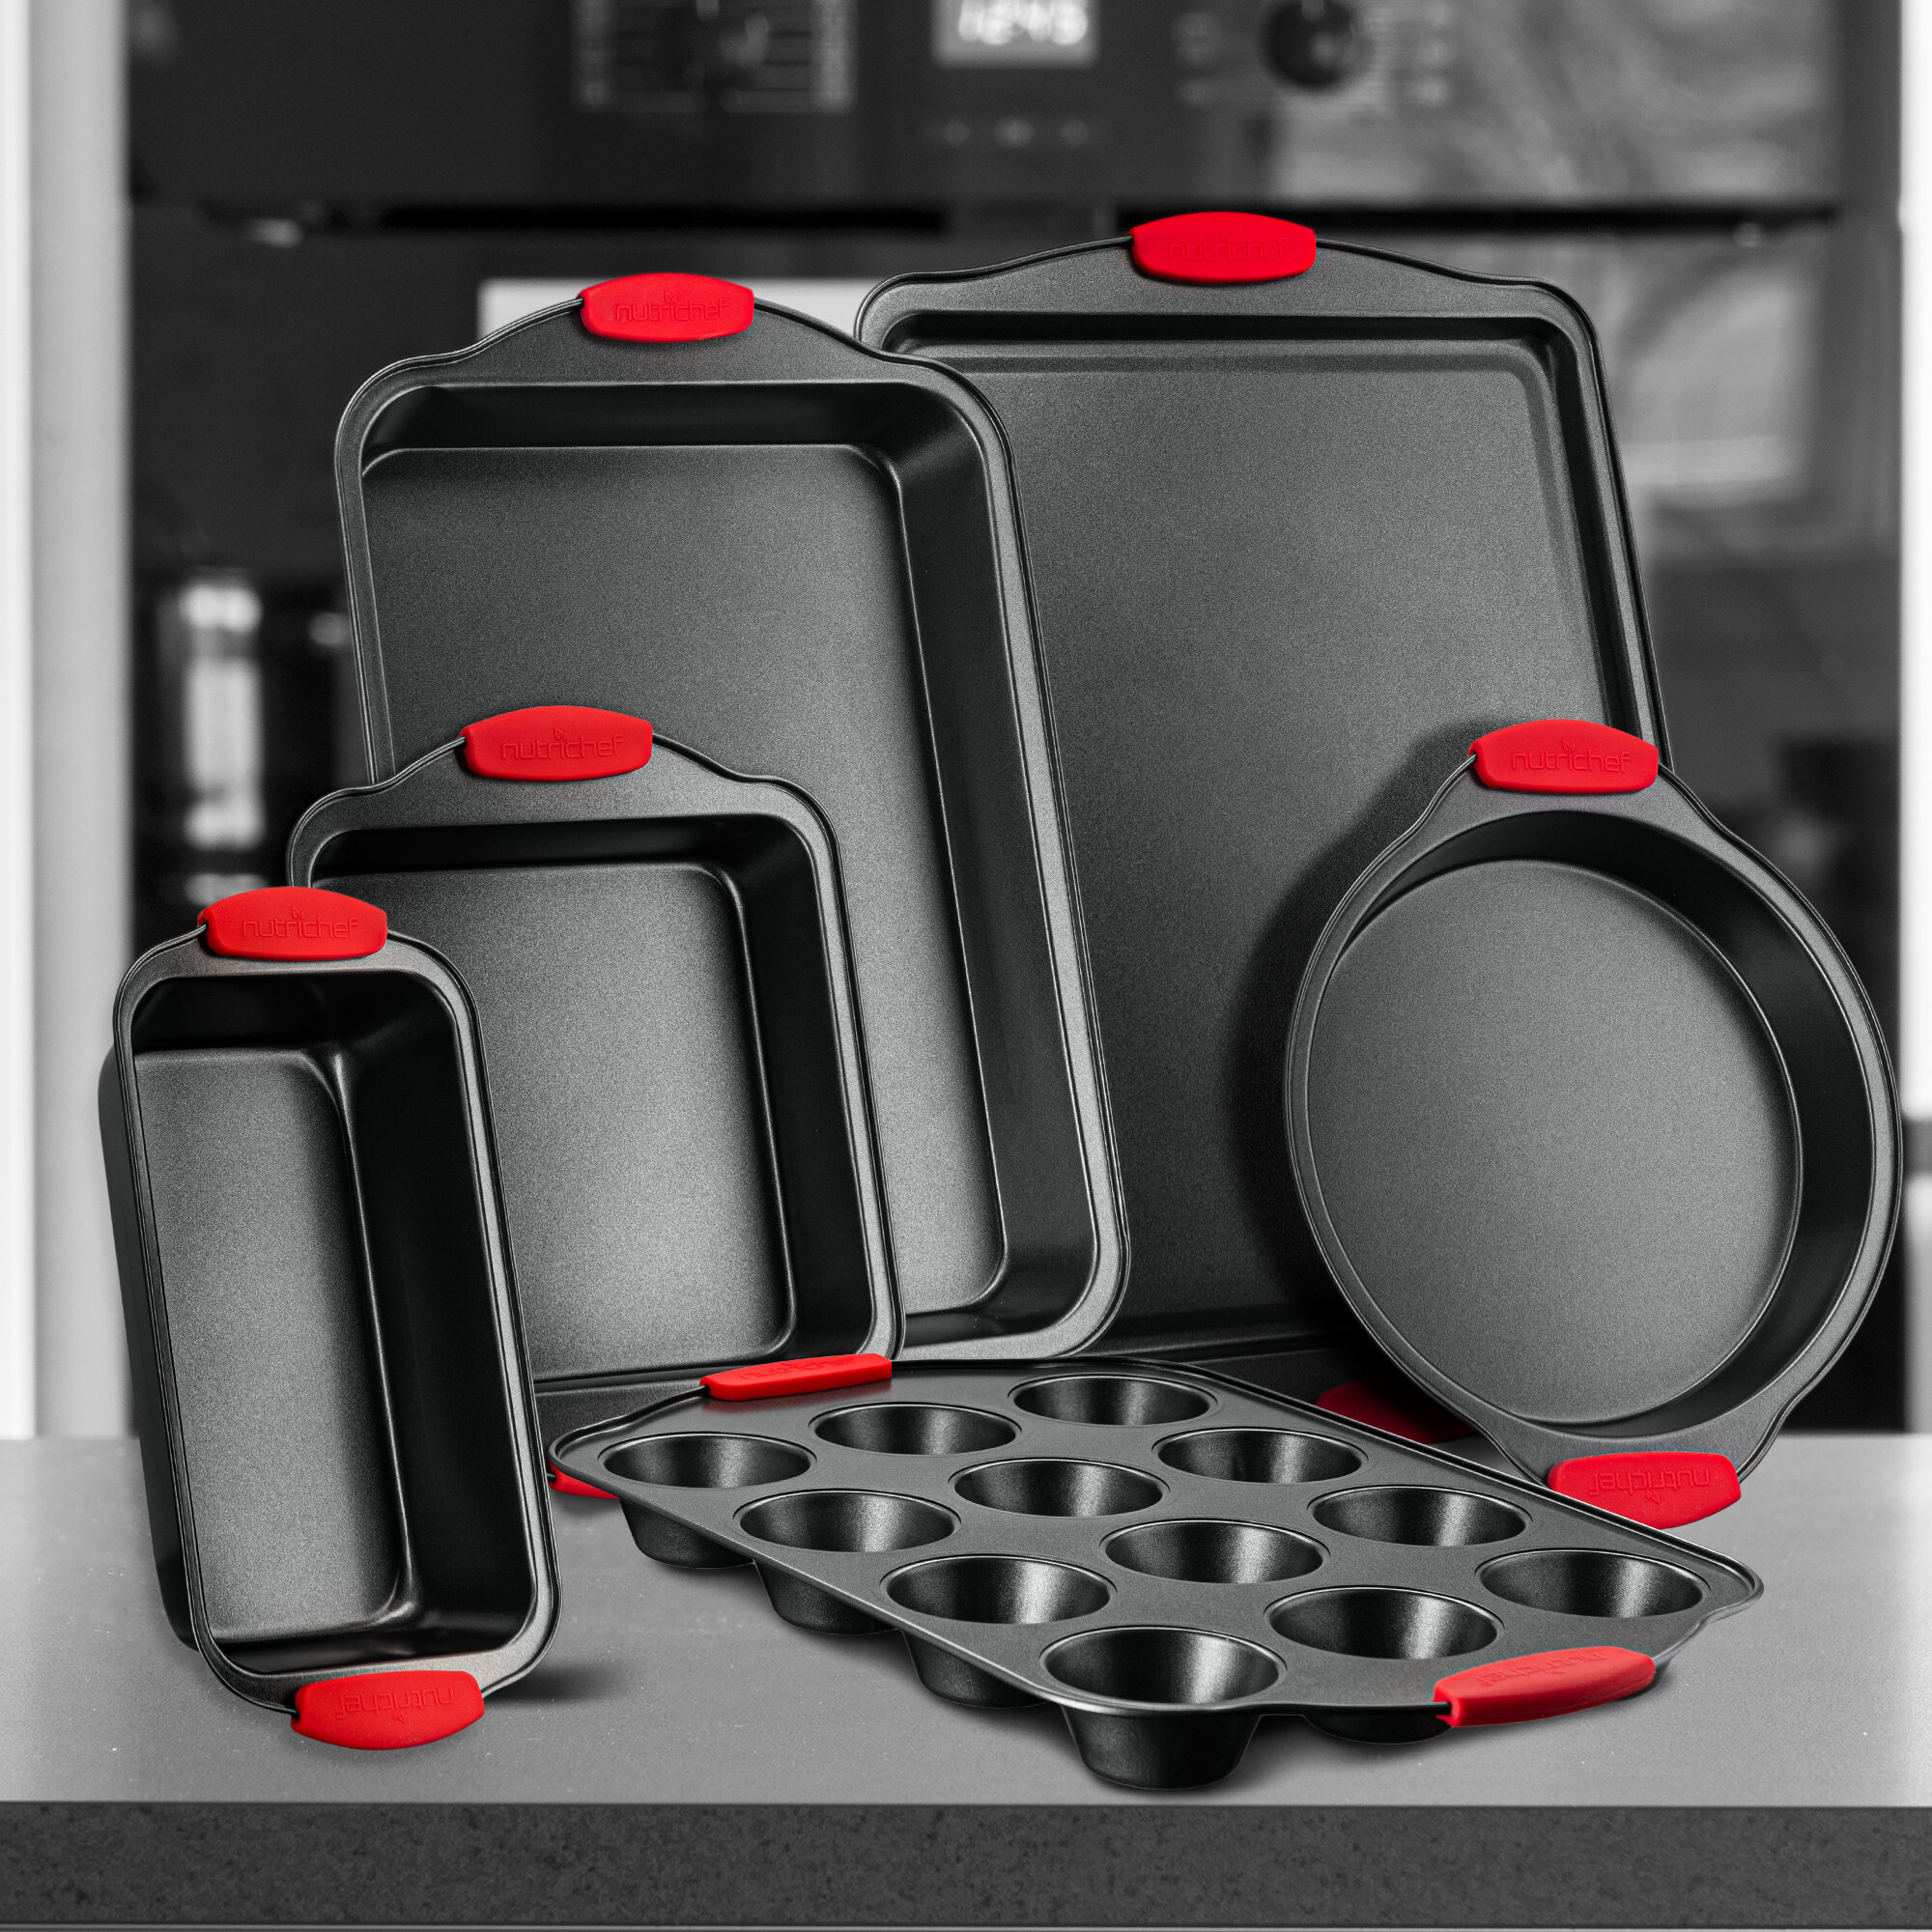 JoyTable Nonstick Bakeware Set - 15 PC Baking Tray Set With Silicone  Handles & Utensils - Oven Safe & Carbon Steel Cookie Sheets, Baking Pans,  Black 